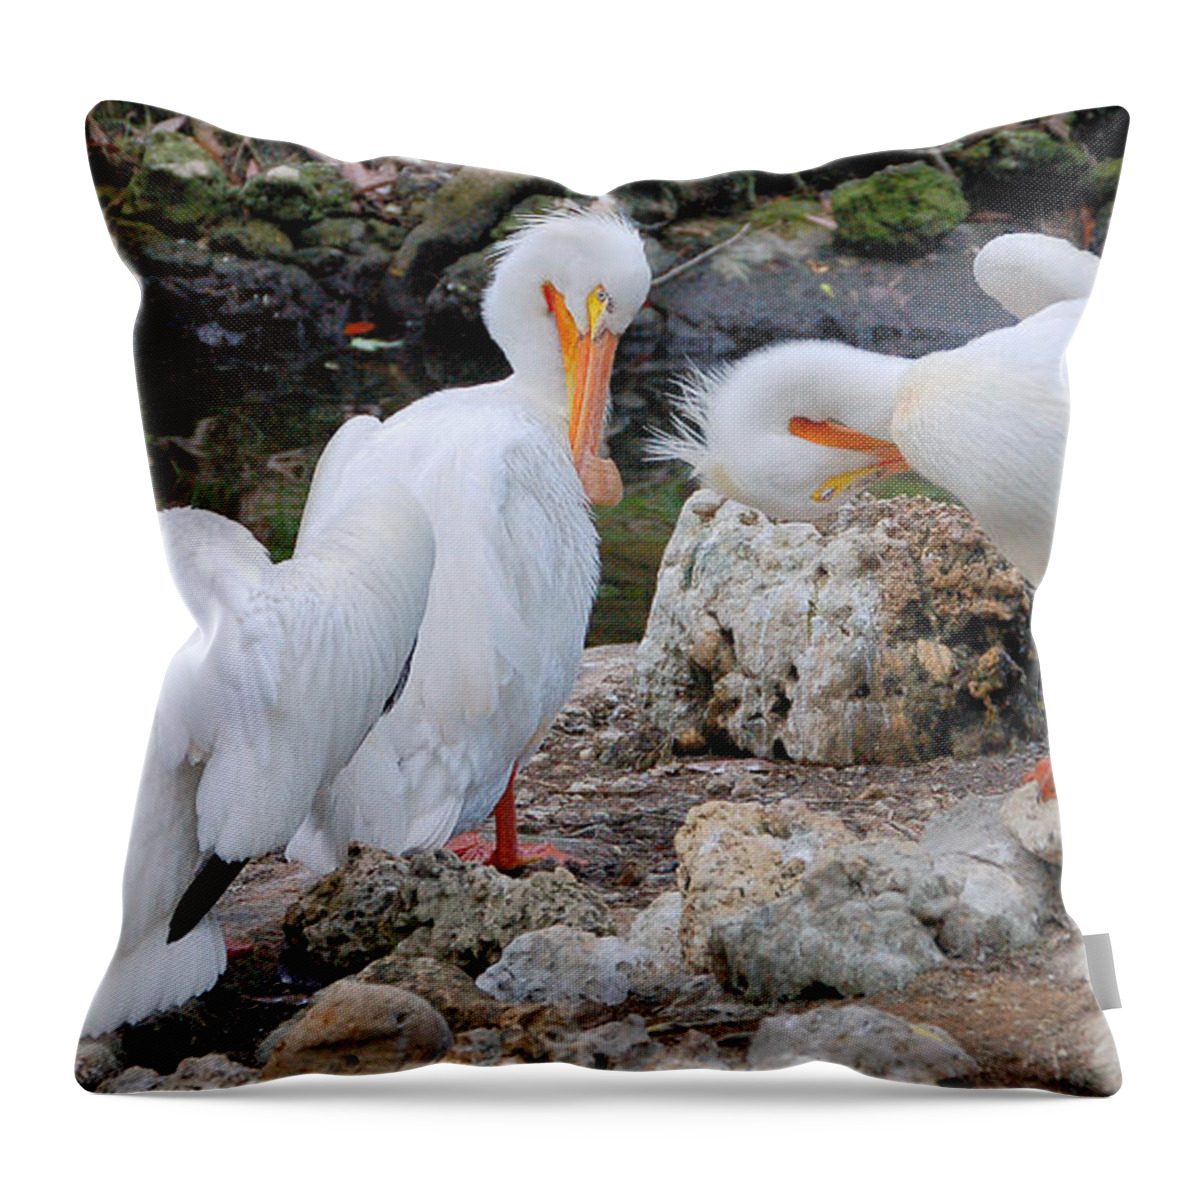 American Pelicans Throw Pillow featuring the photograph Three Amigos White Pelicans by Donna Proctor